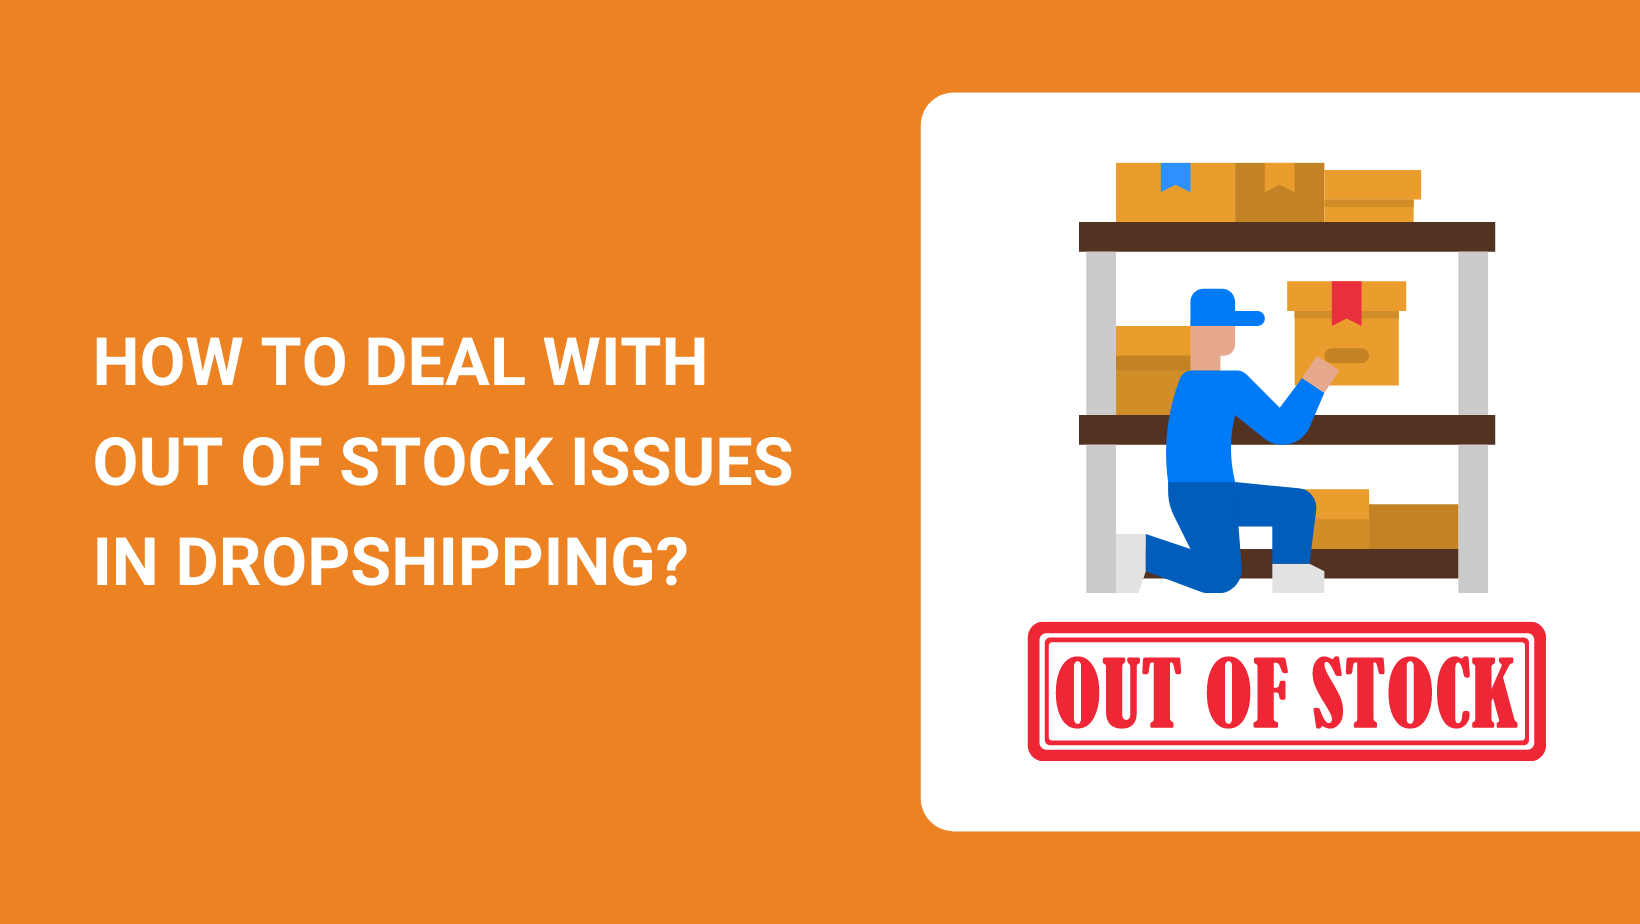 HOW TO DEAL WITH OUT OF STOCK ISSUES IN DROPSHIPPING